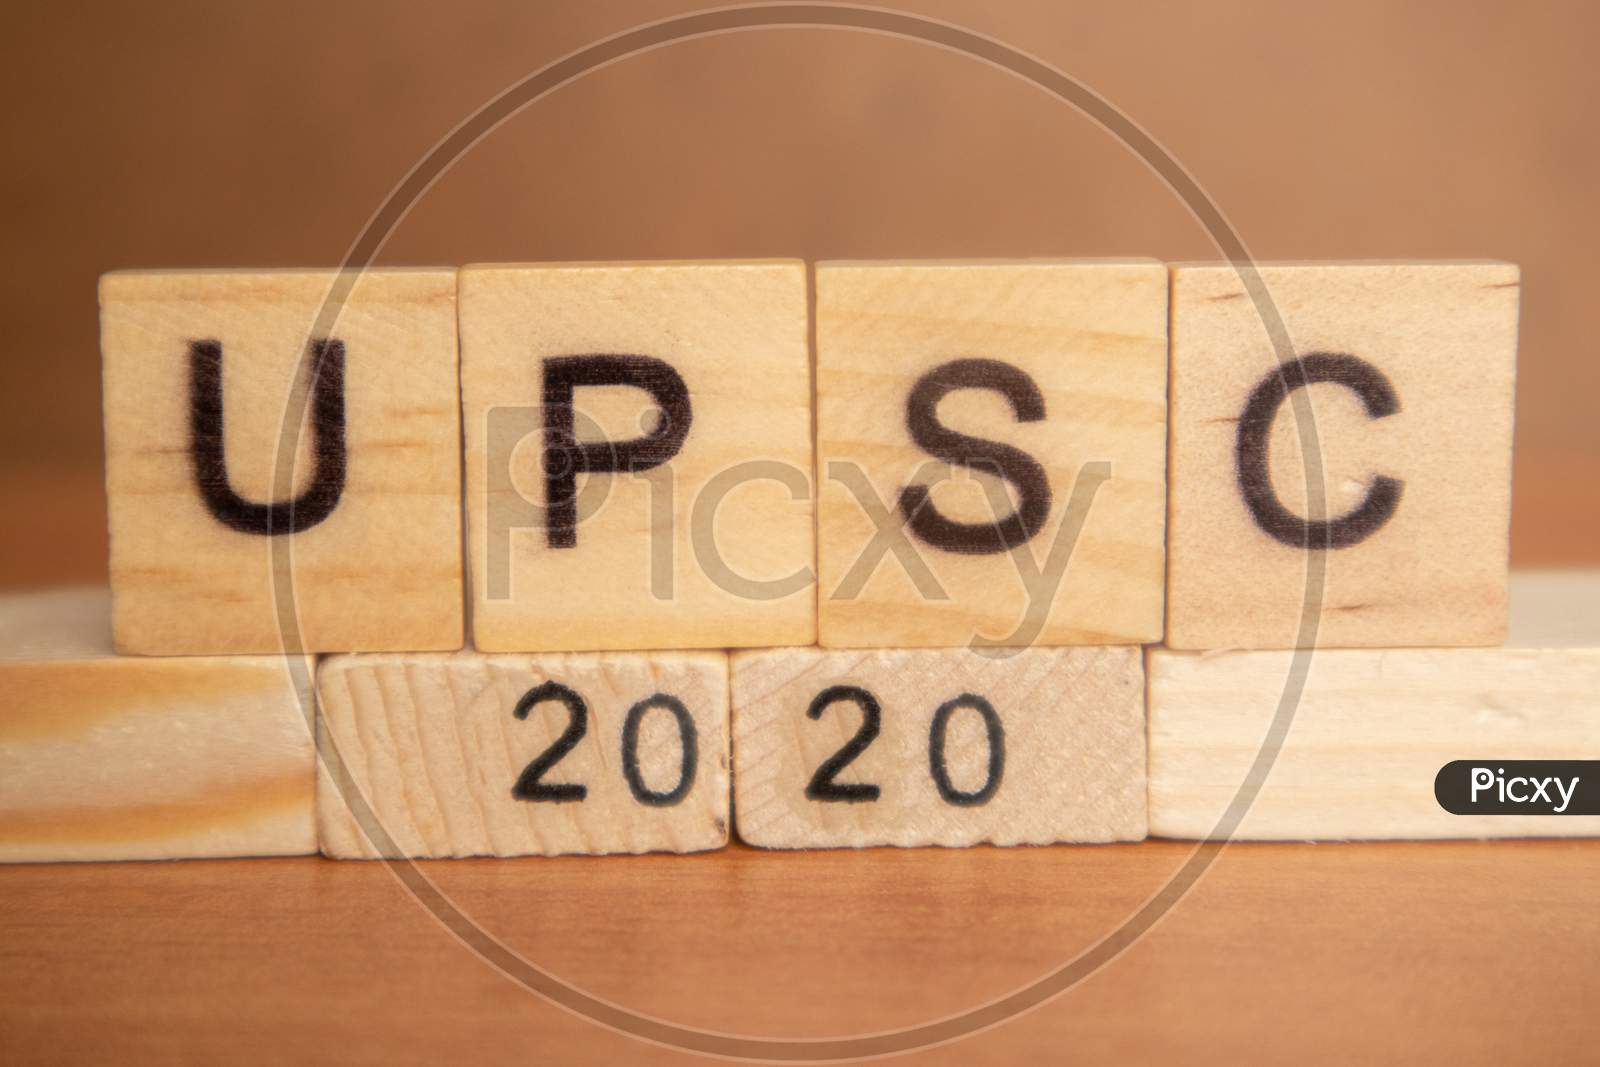 Upsc Or Union Public Service Commission 2020 In Wooden Block Letters